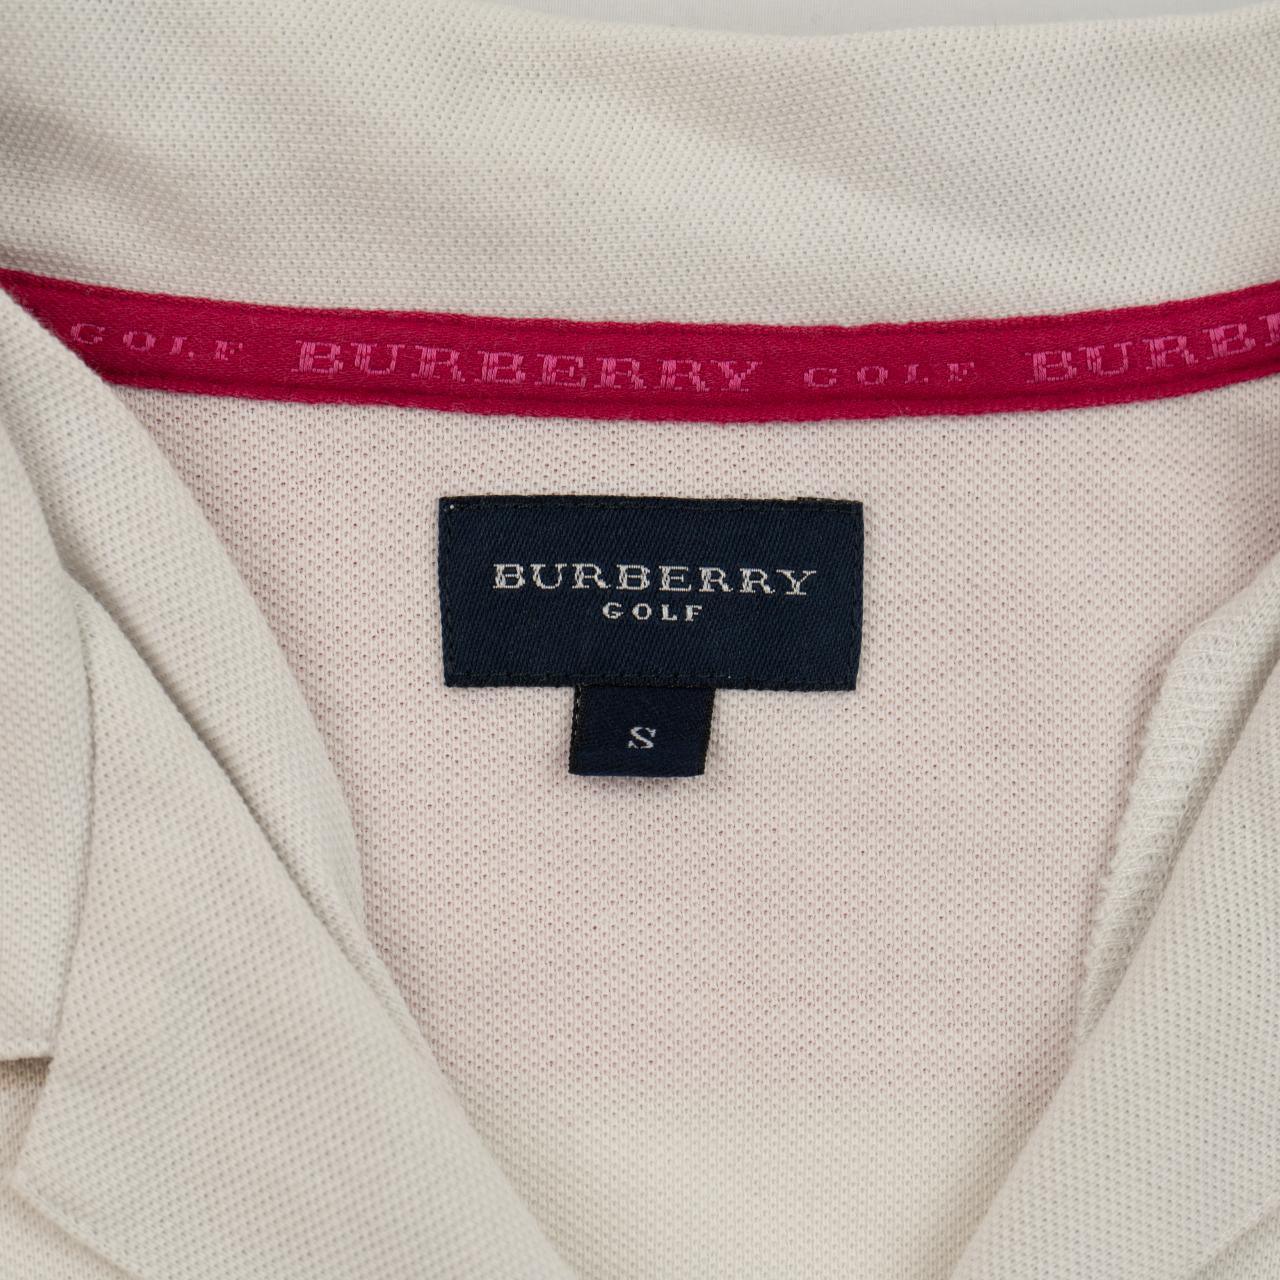 Vintage Burberry Long Sleeve Polo Shirt Woman’s Size S - Known Source